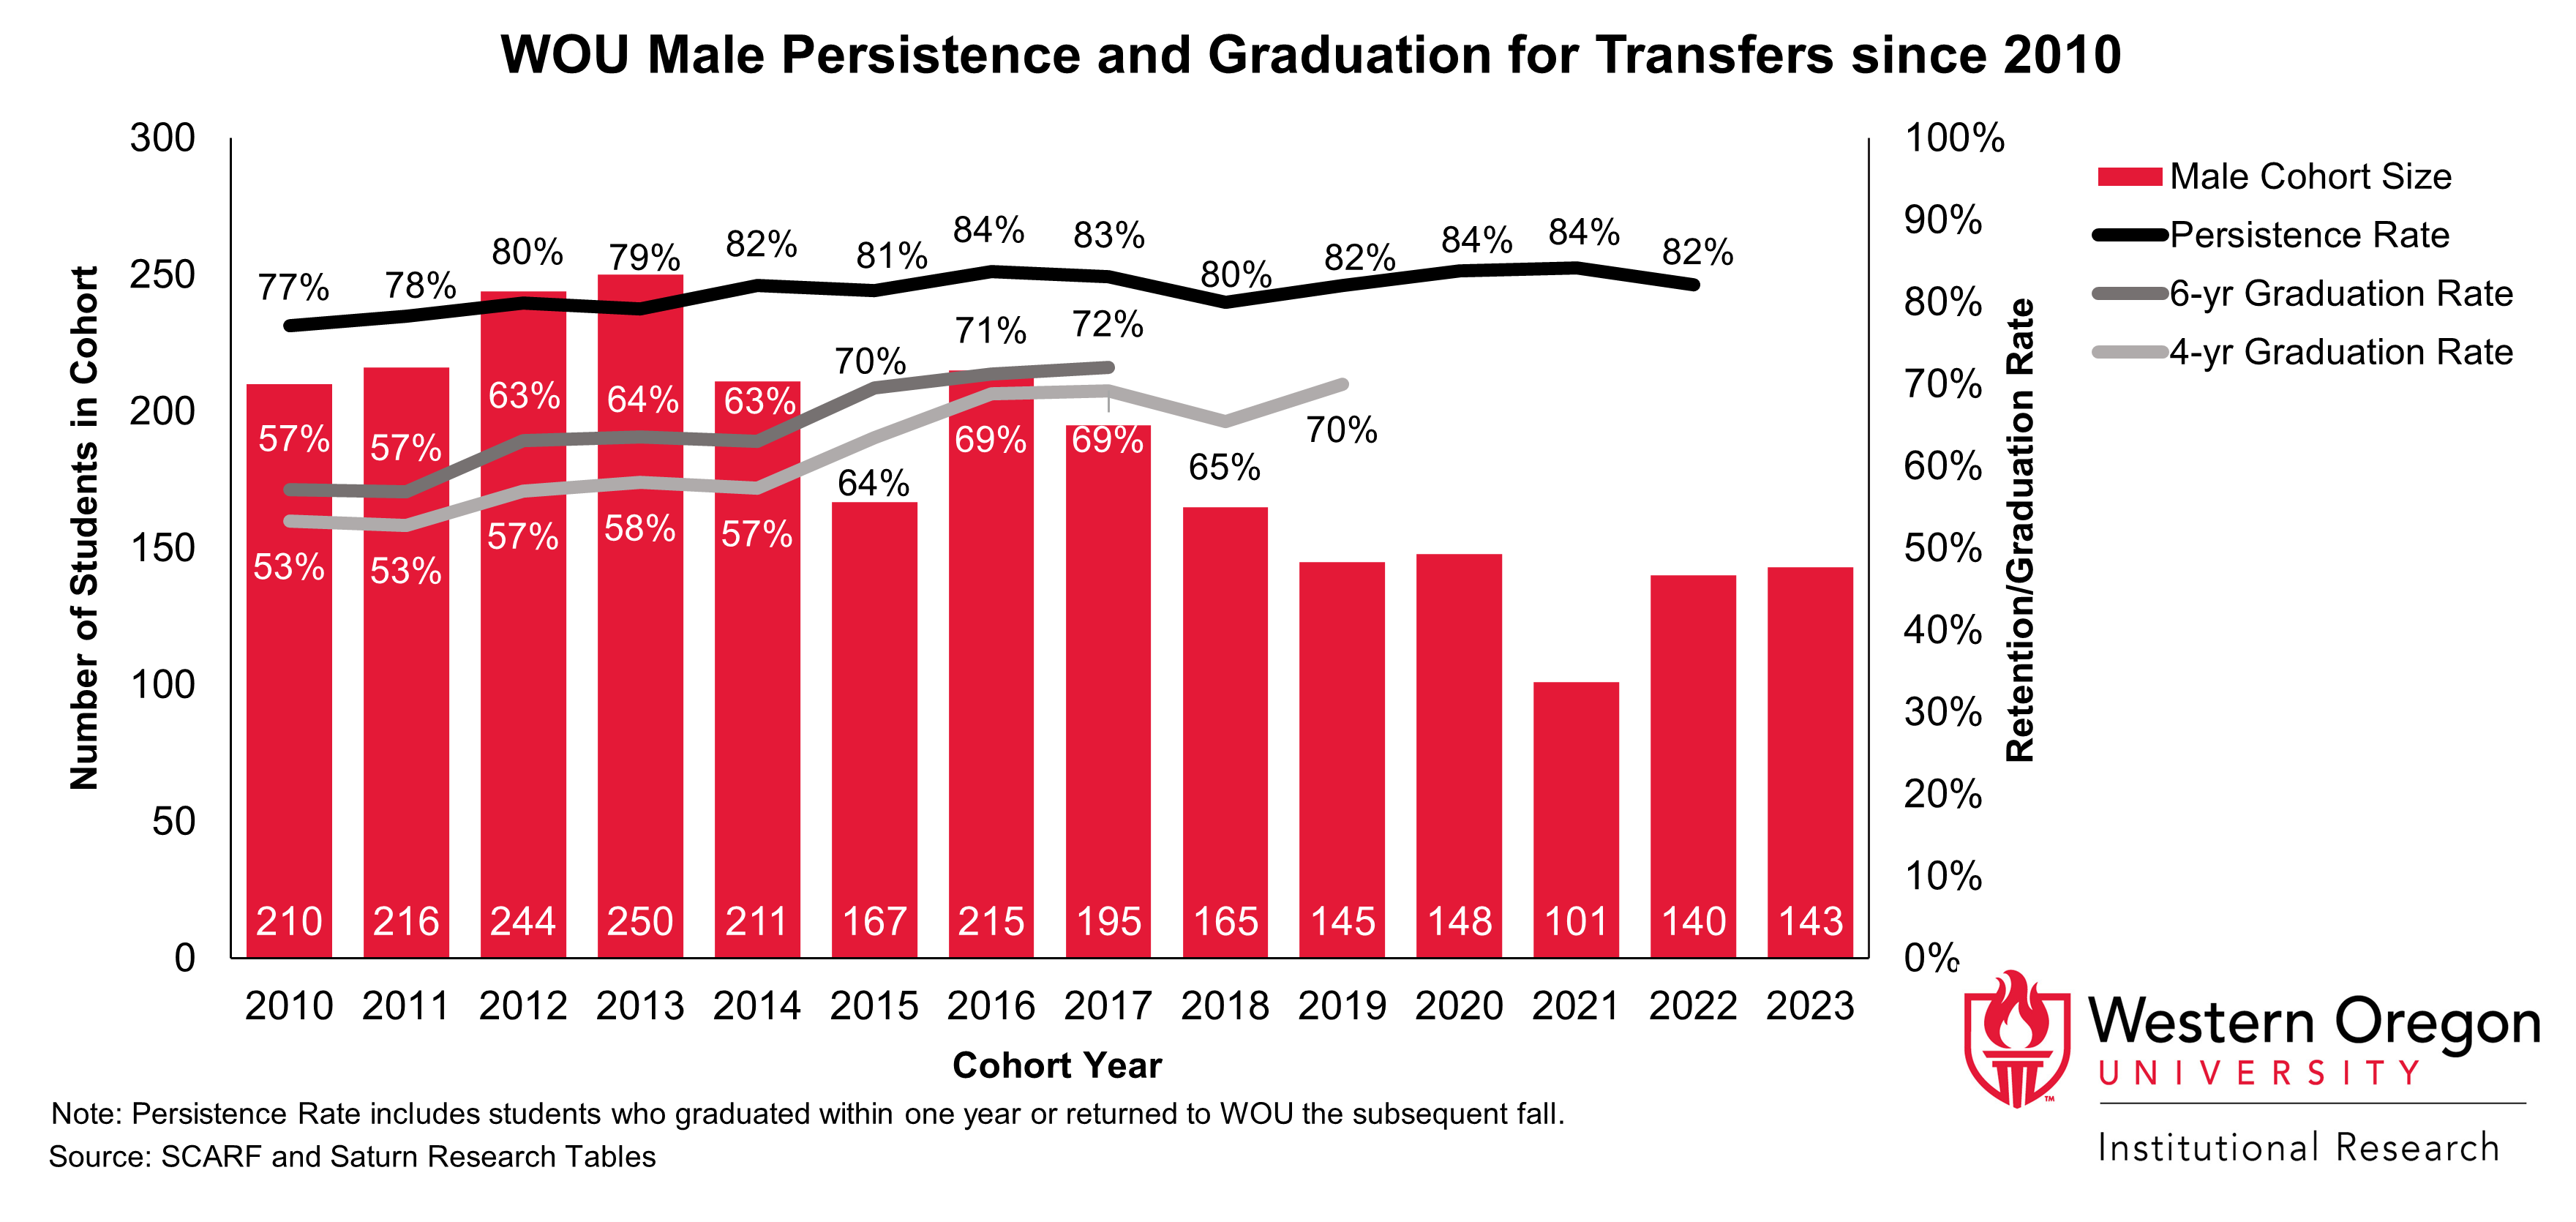 Bar and line graph of retention and 4- and 6-year graduation rates since 2010 for WOU transfer students that are male, showing that graduation and retention rates have increased overall.